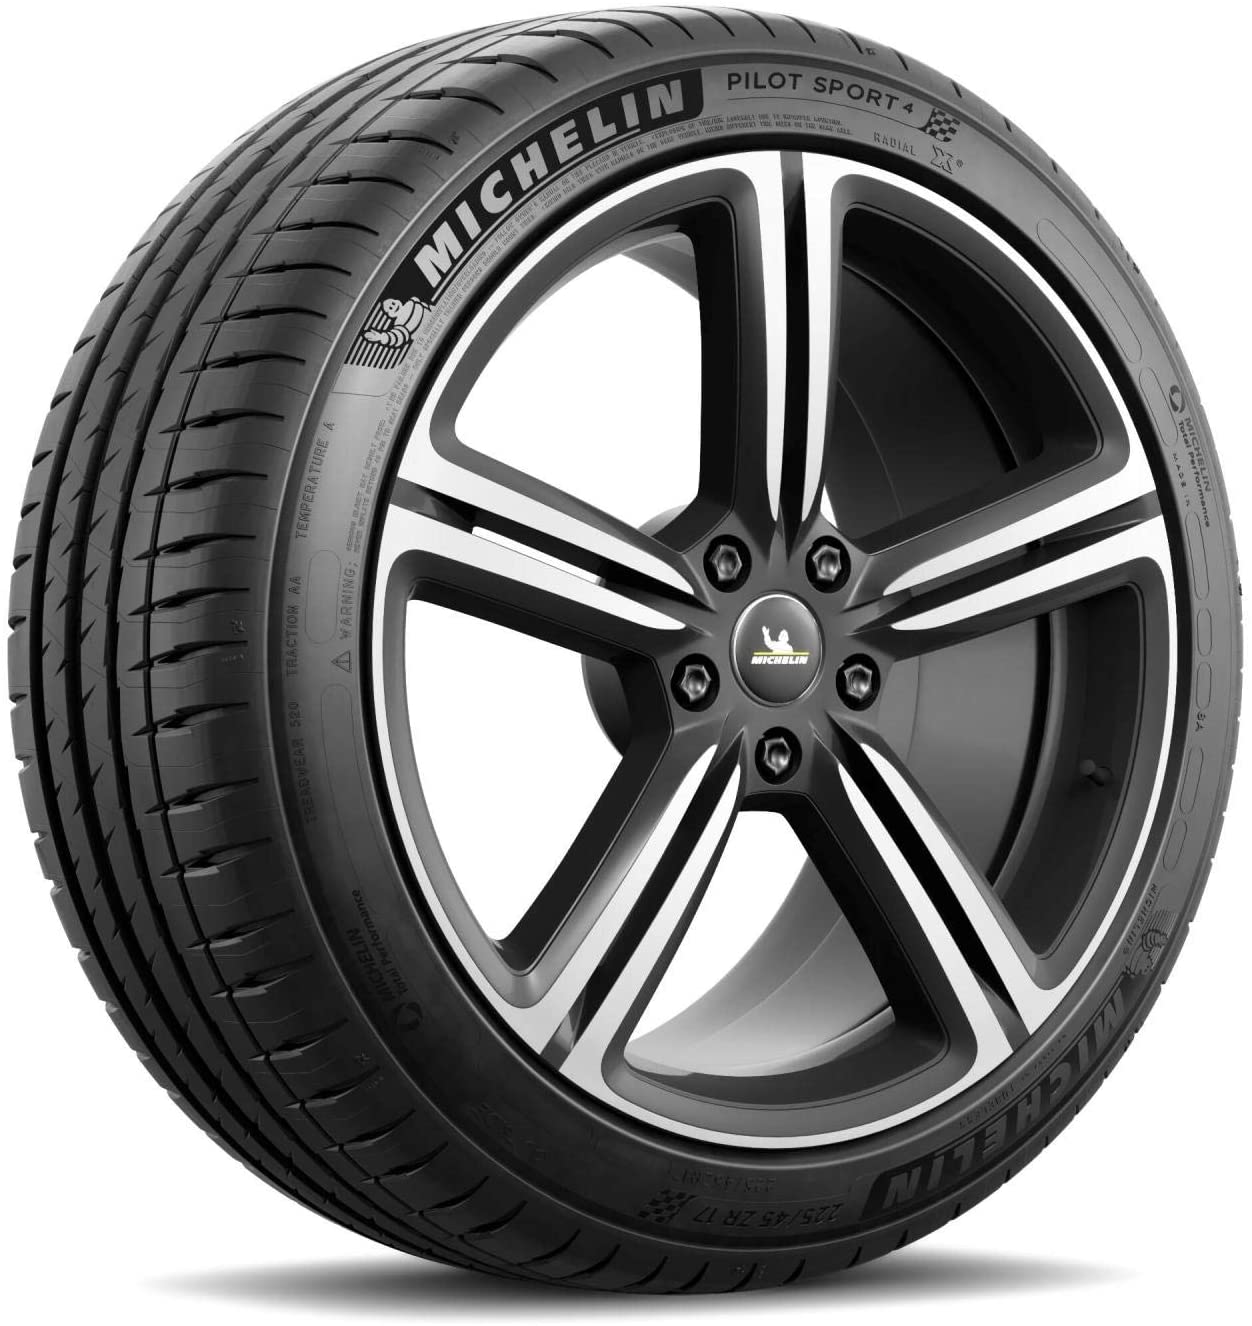 Michelin Pilot Sport 4 - Tire Reviews and Tests